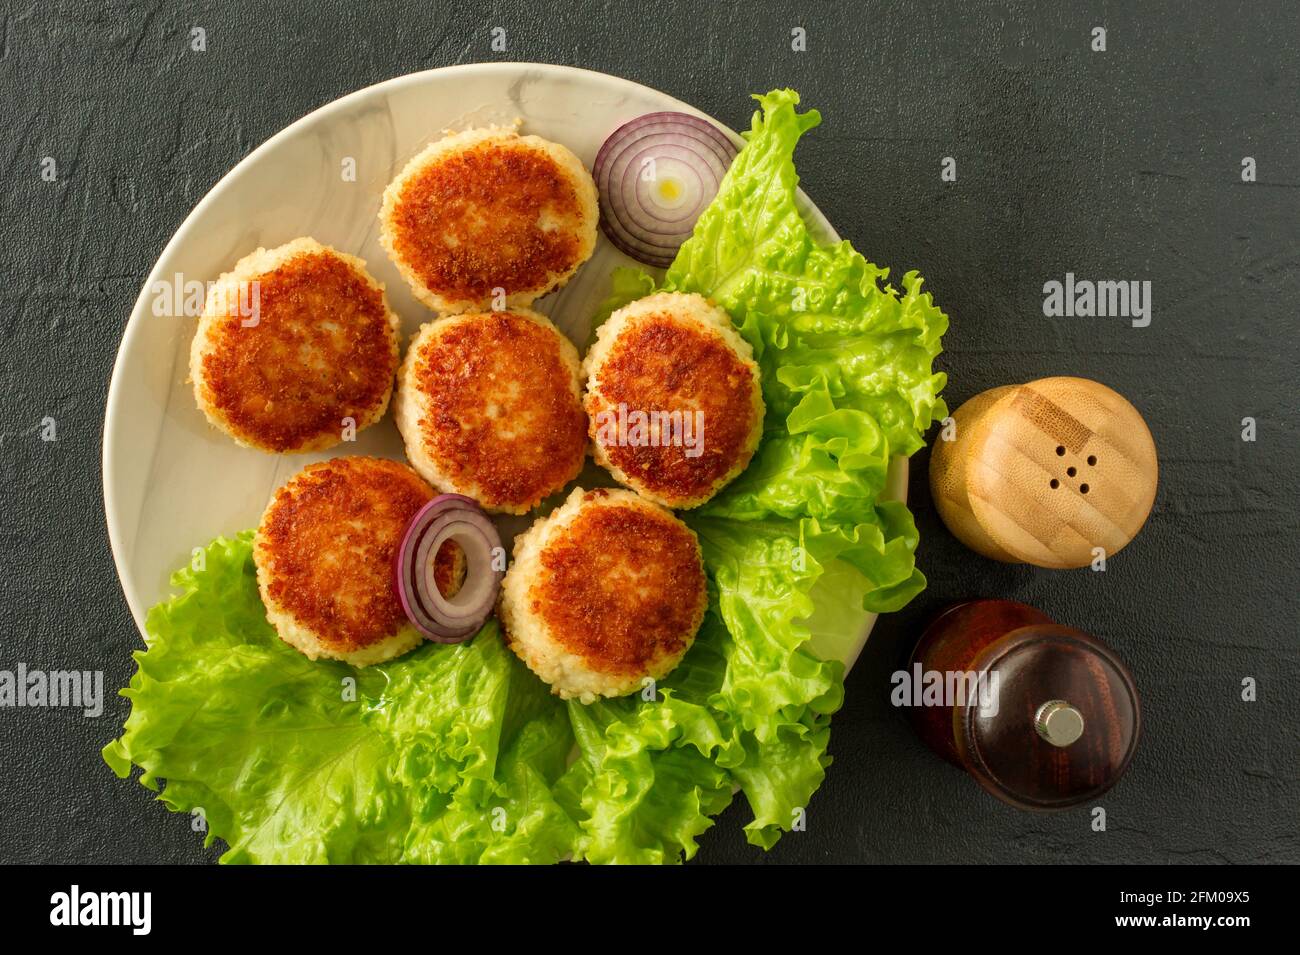 juicy delicious coated with breadcrumbs and fried chicken cutlets on white plate with spices in wooden shakers on dark background, view from above. Stock Photo